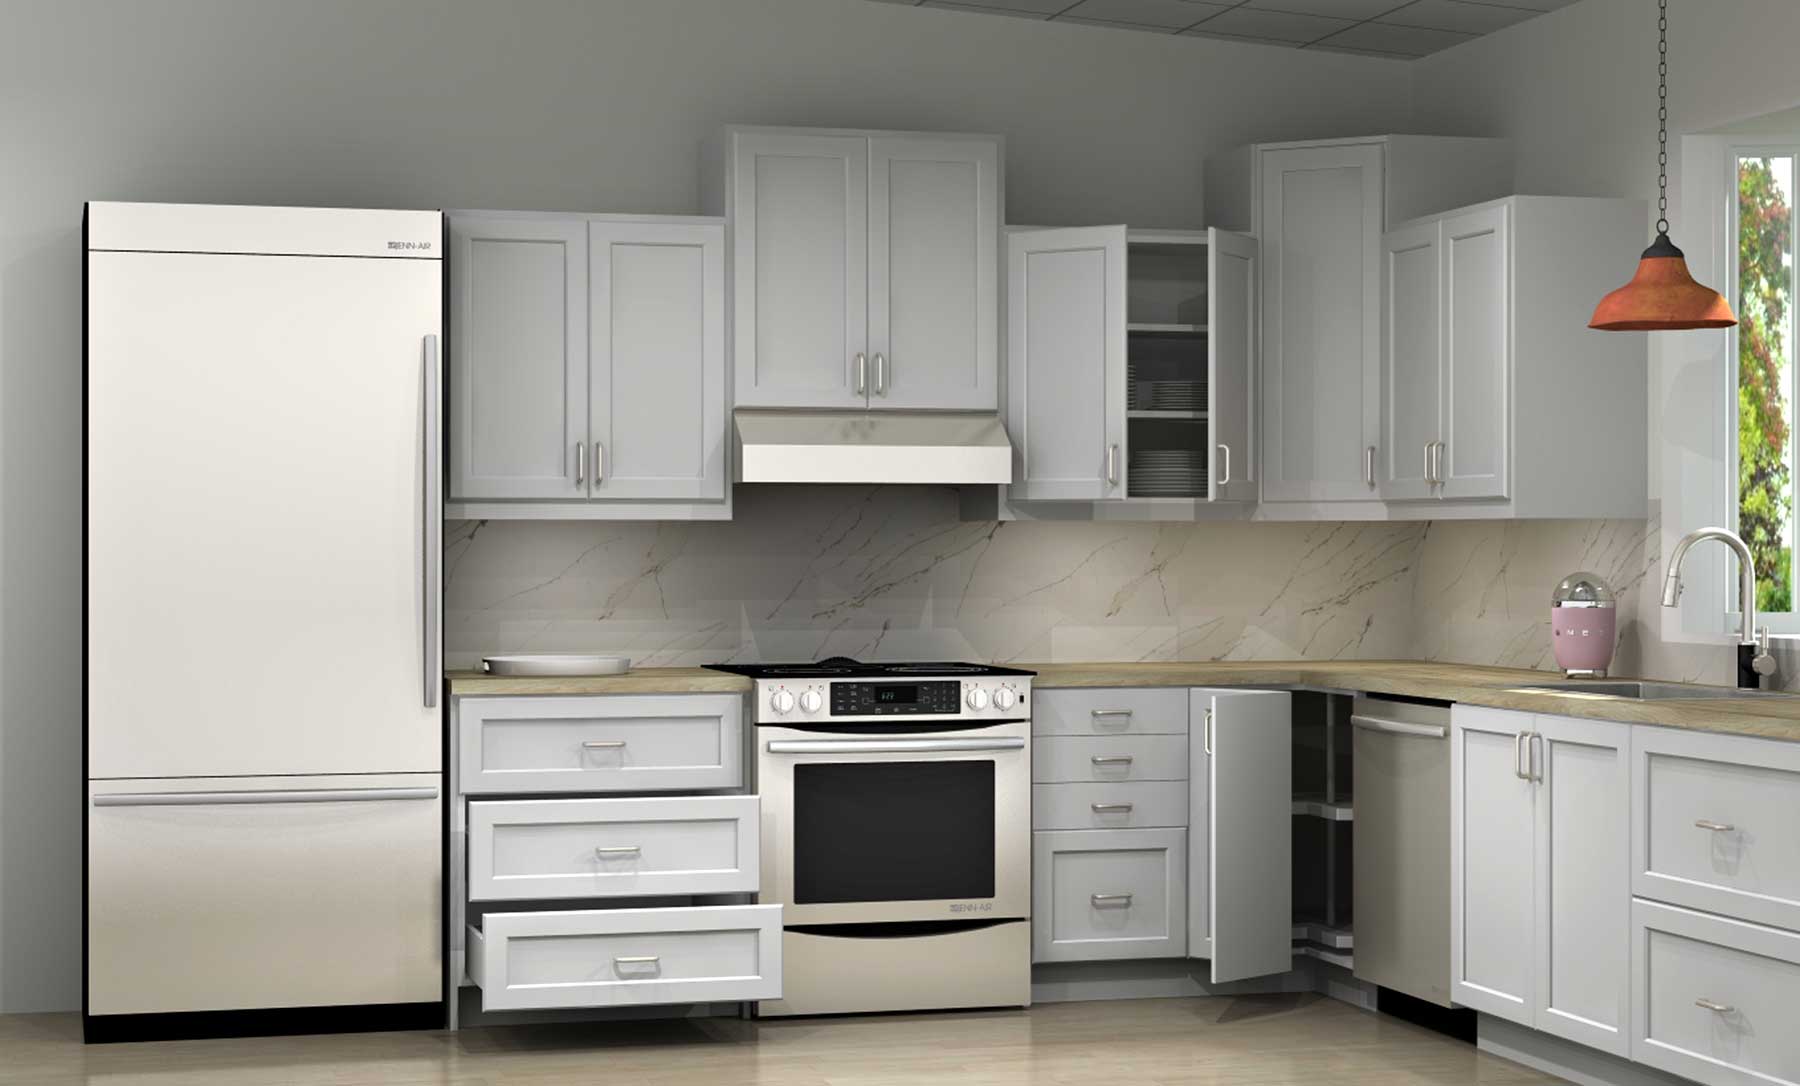 What Is The Height Of Wall Cabinets